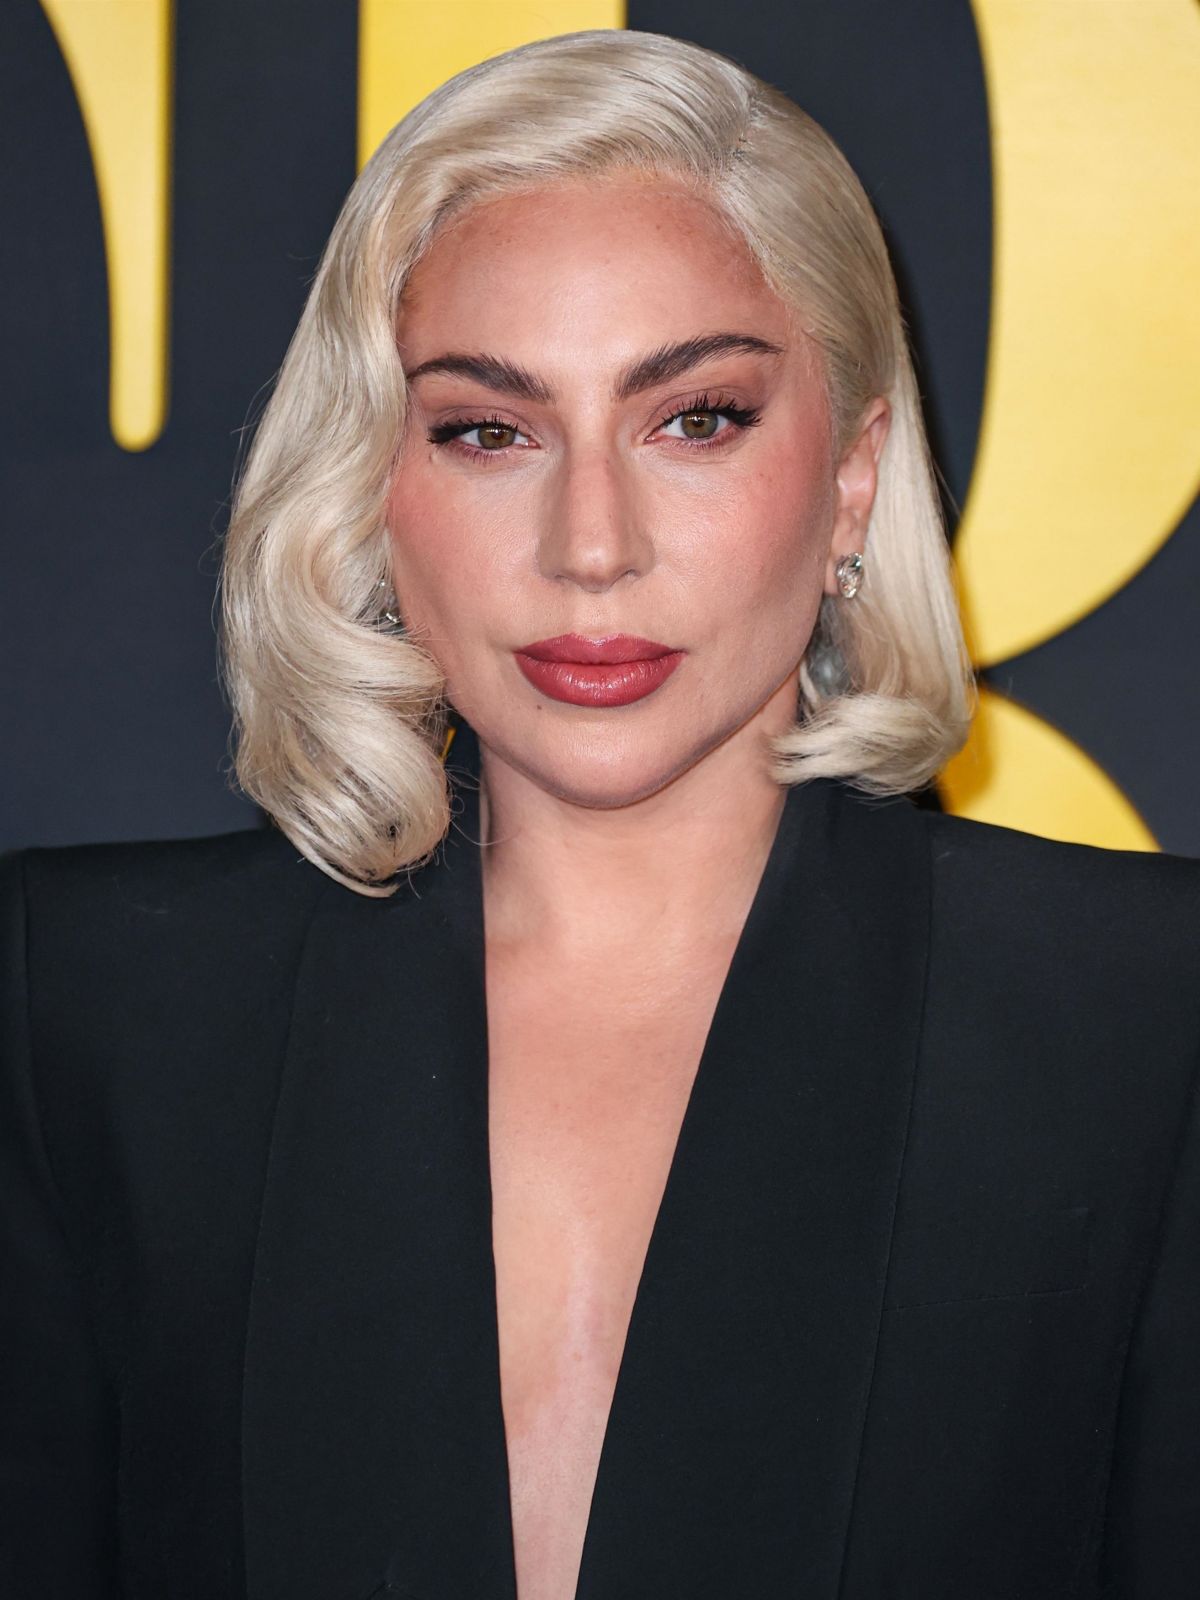 Lady Gaga attends at Maestro Photocall, Academy Museum, LA